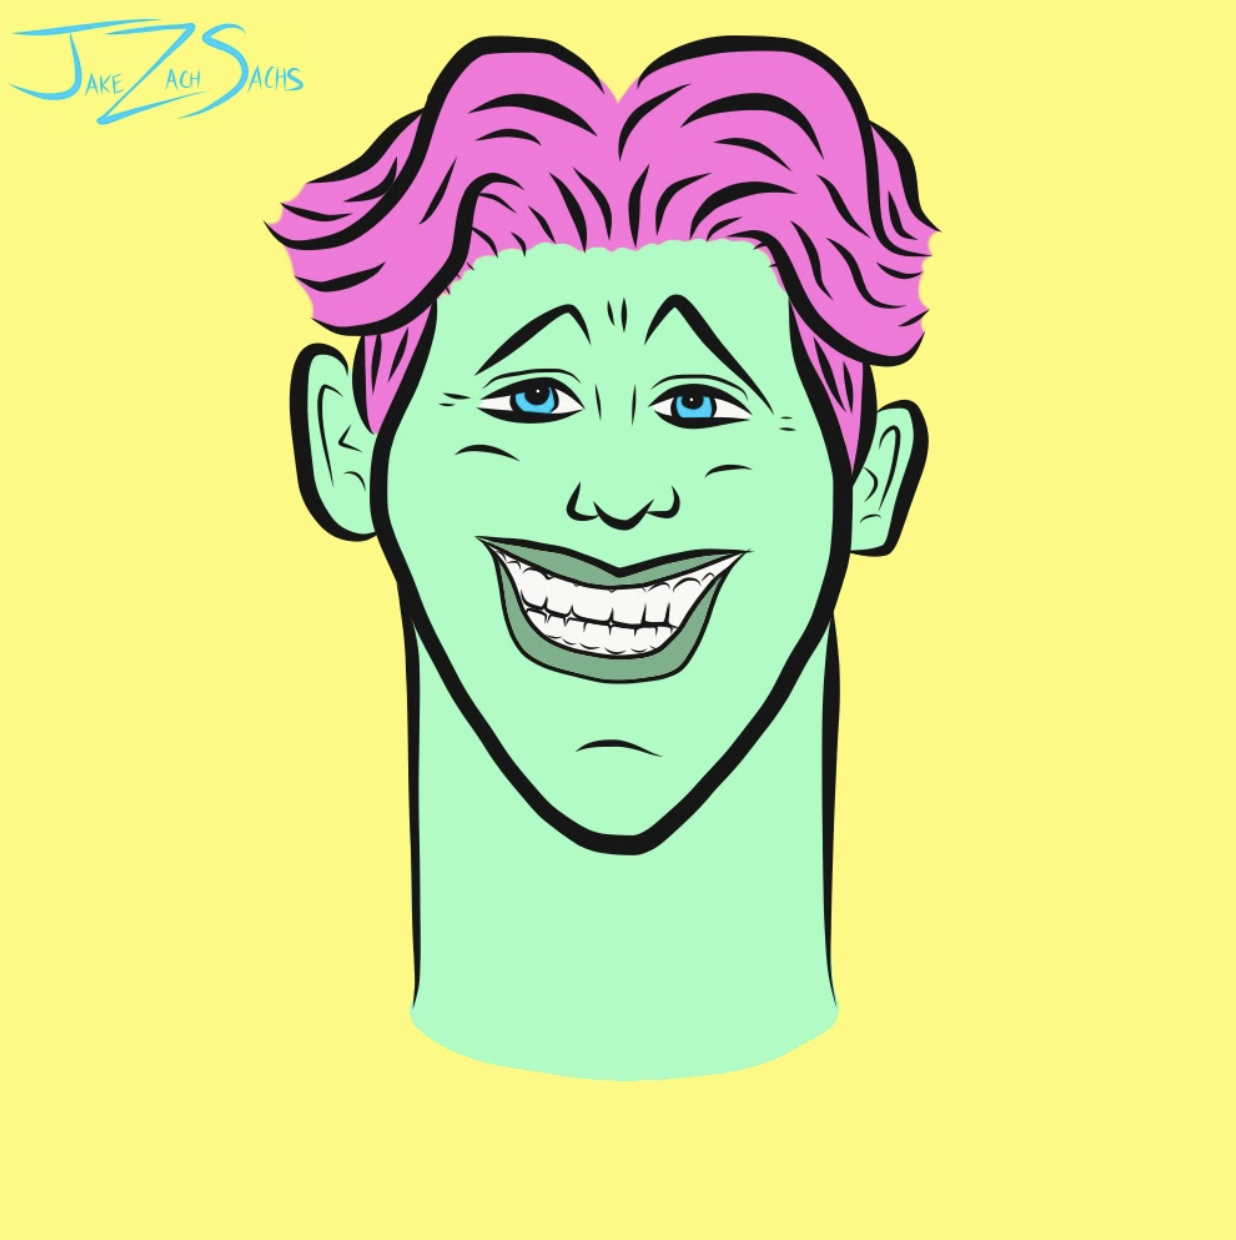 illustration of a person smiling